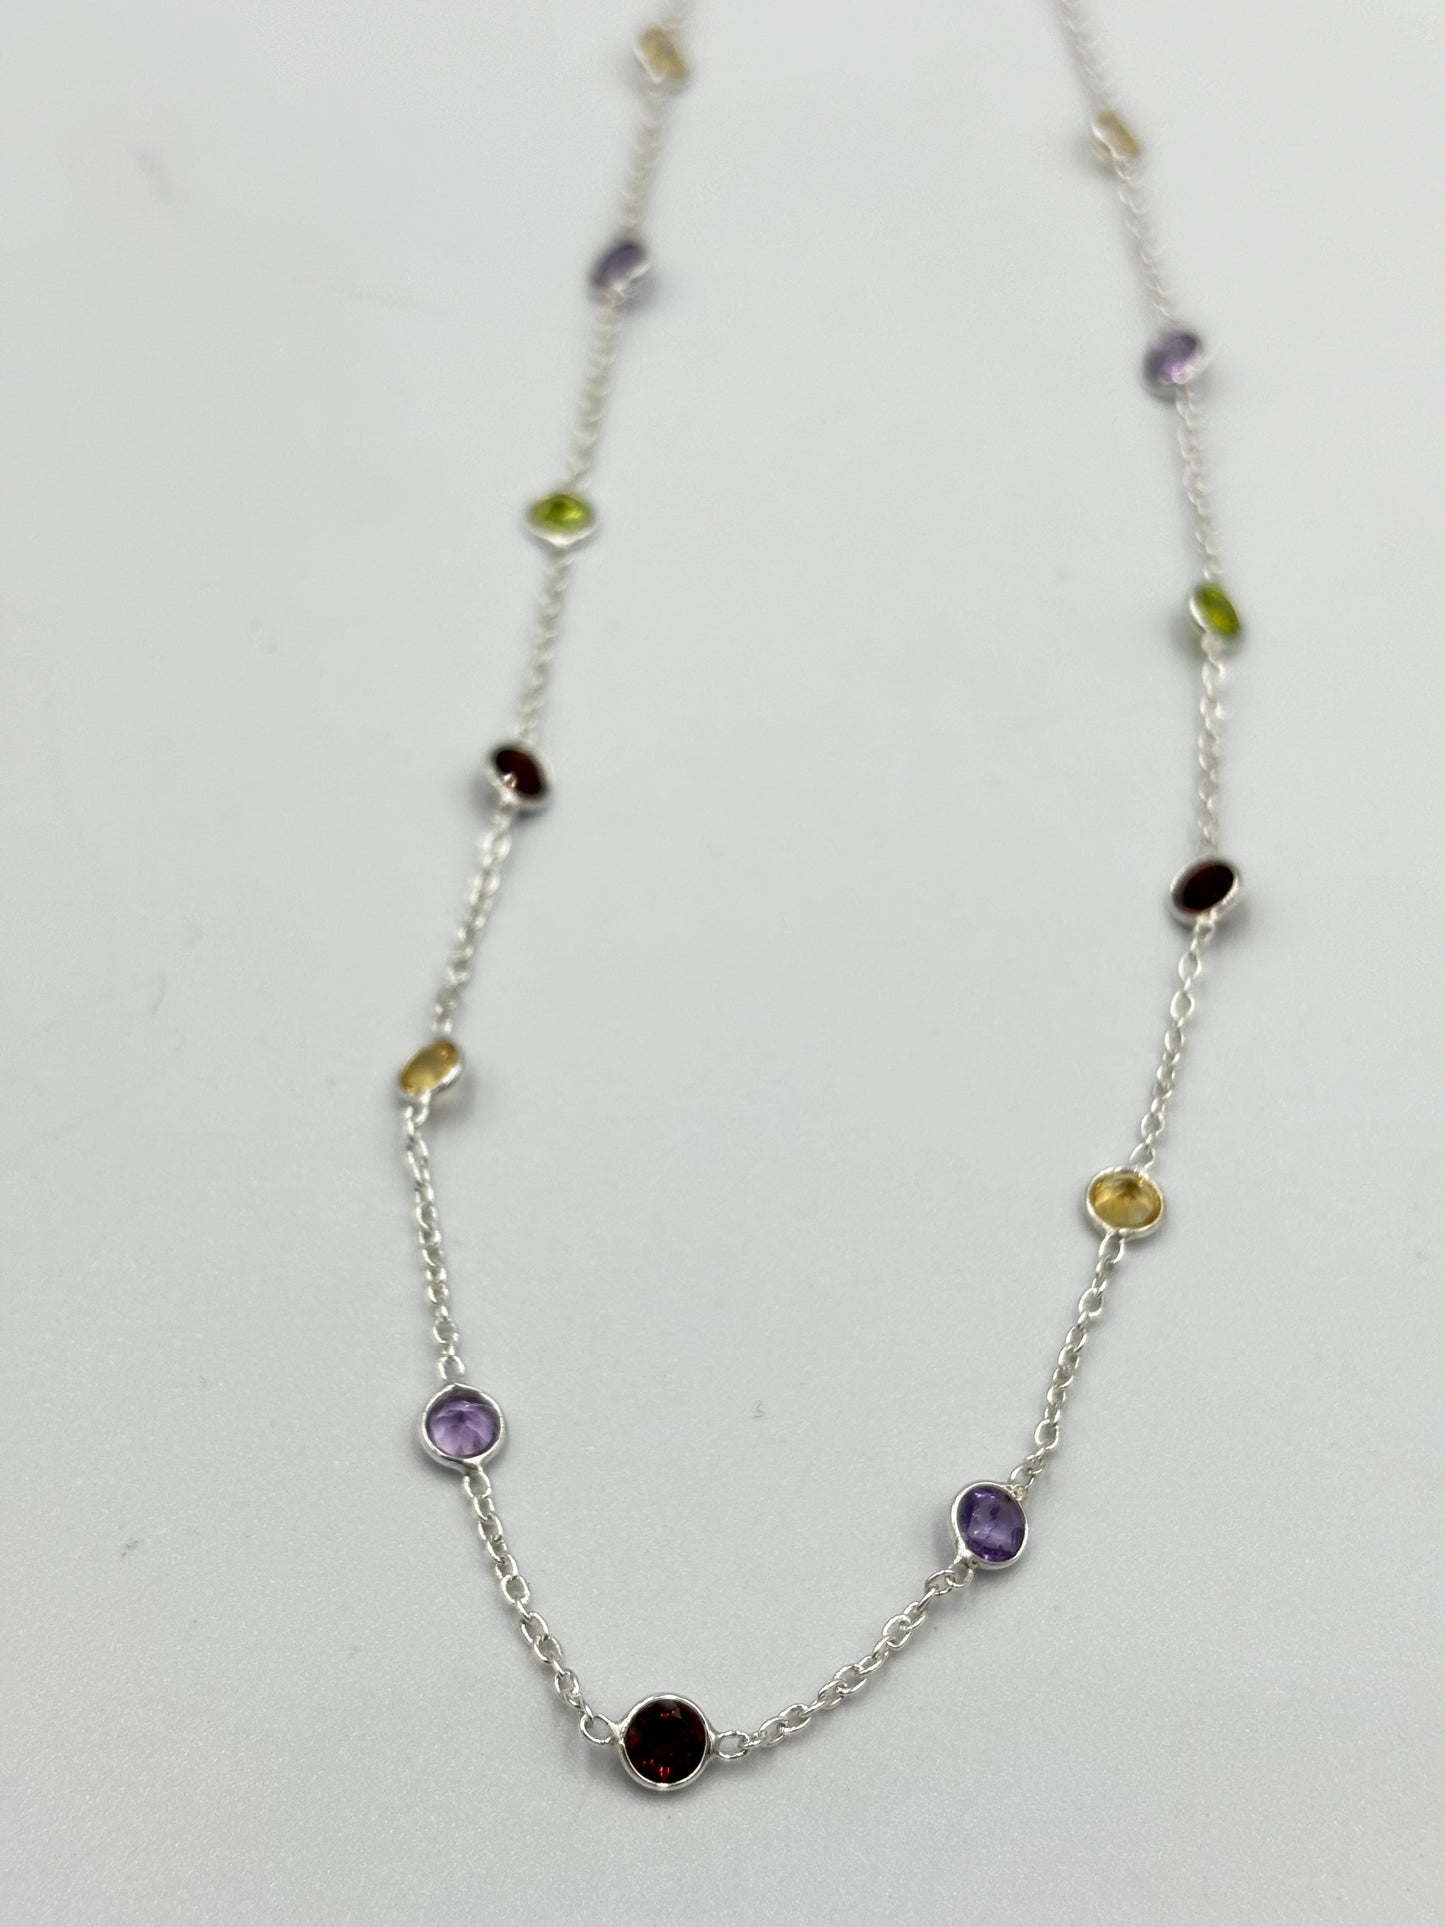 Stunning Sterling silver necklace with 5mm Garnet, Peridot and Citrine semi precious stones in-bedded in chain